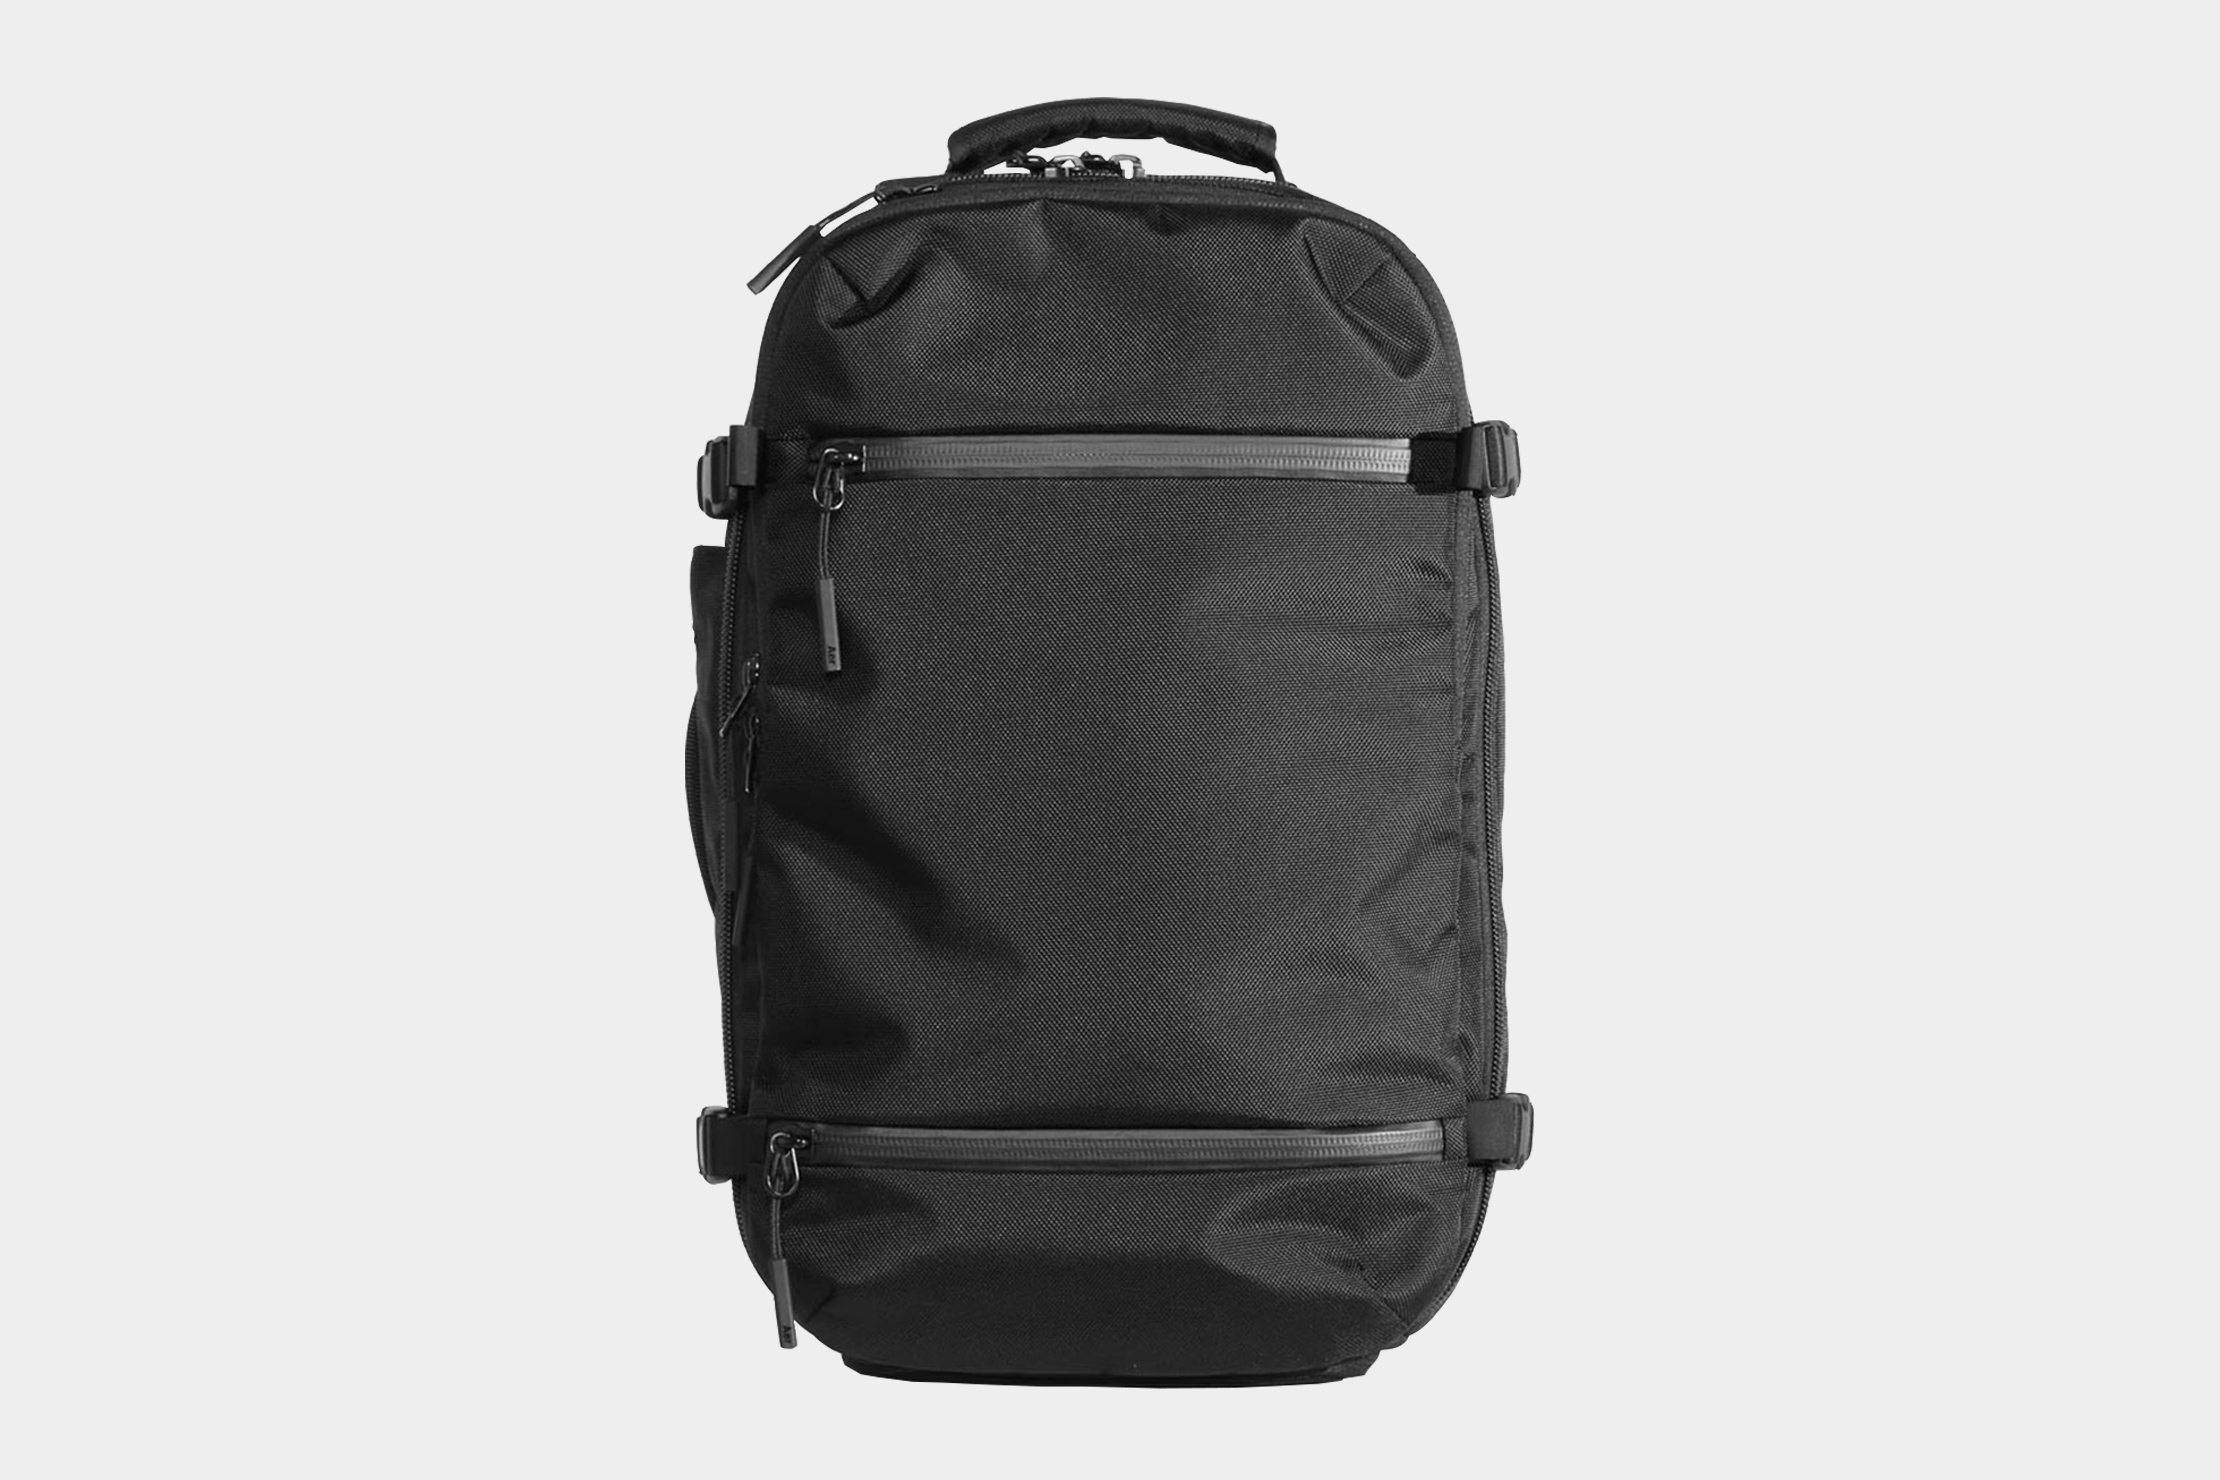 Aer Travel Pack Review One Bag Travel Pack Hacker